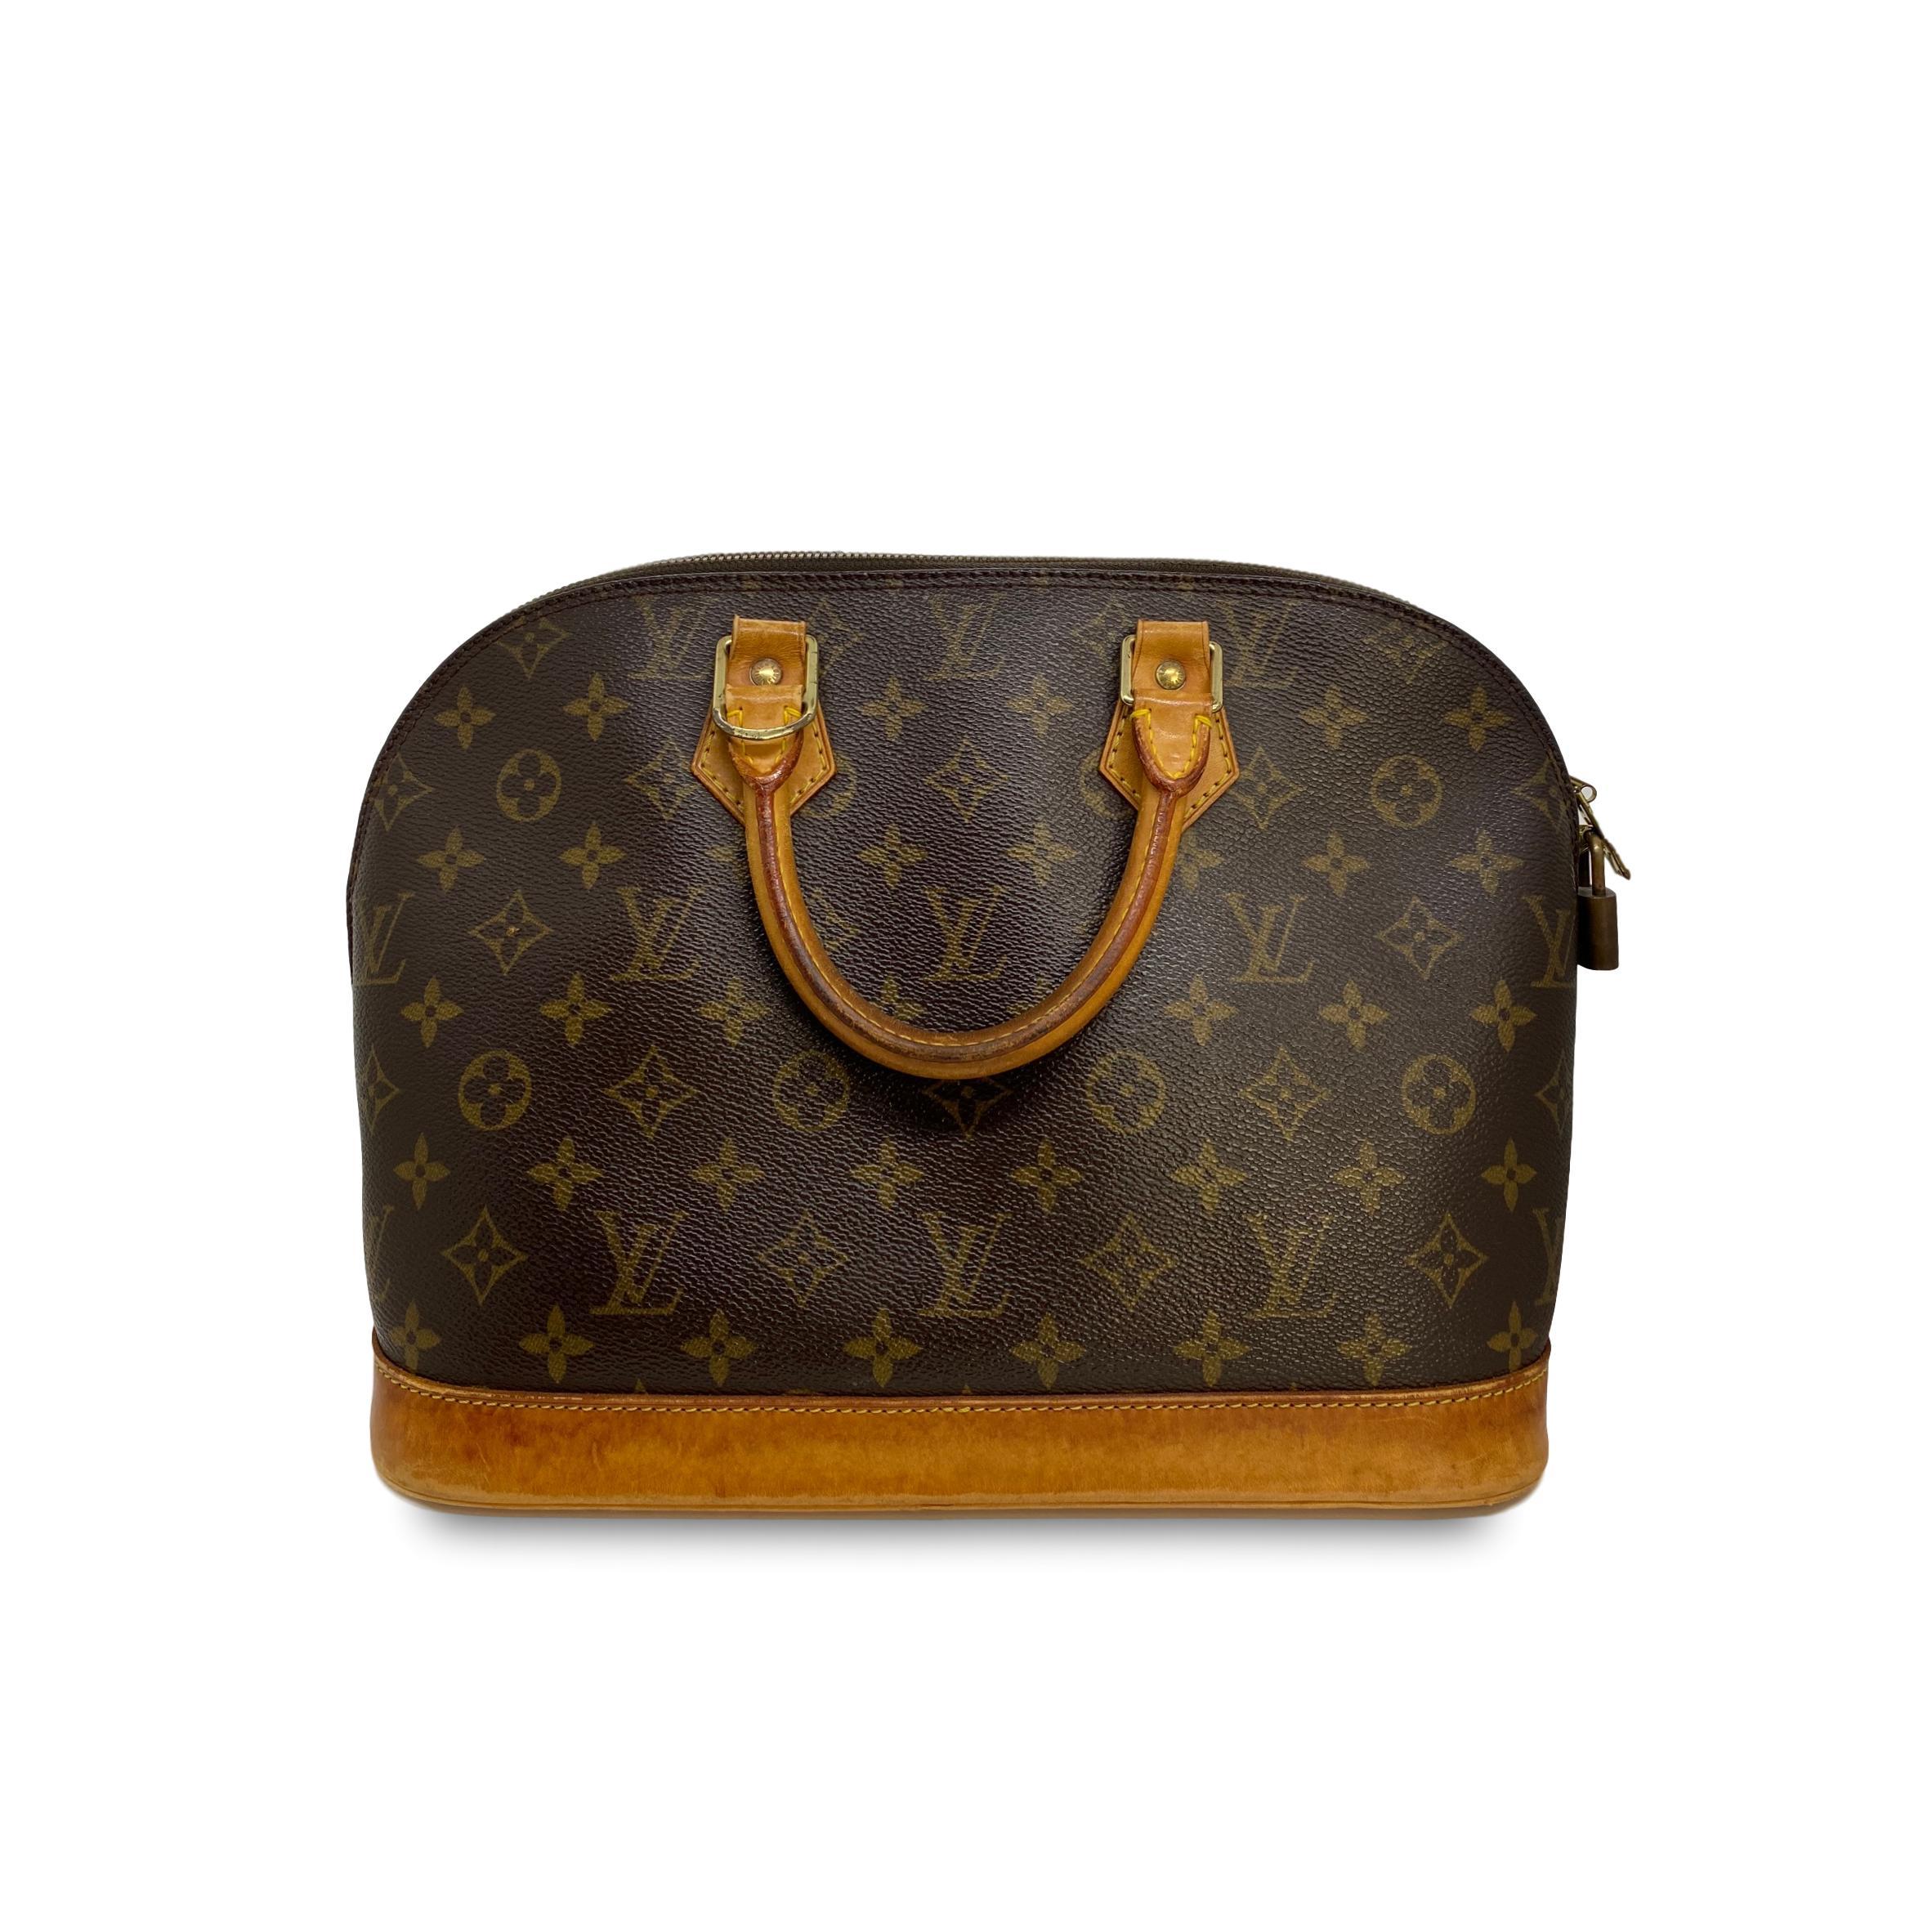 The Louis Vuitton Alma is a classic closet staple, first introduced and inspired by the architect of the Art Deco era of the early 1930's. Originally designed by Gaston-Louis Vuitton, the bag was originally named “Champs-Elysées” after the famous